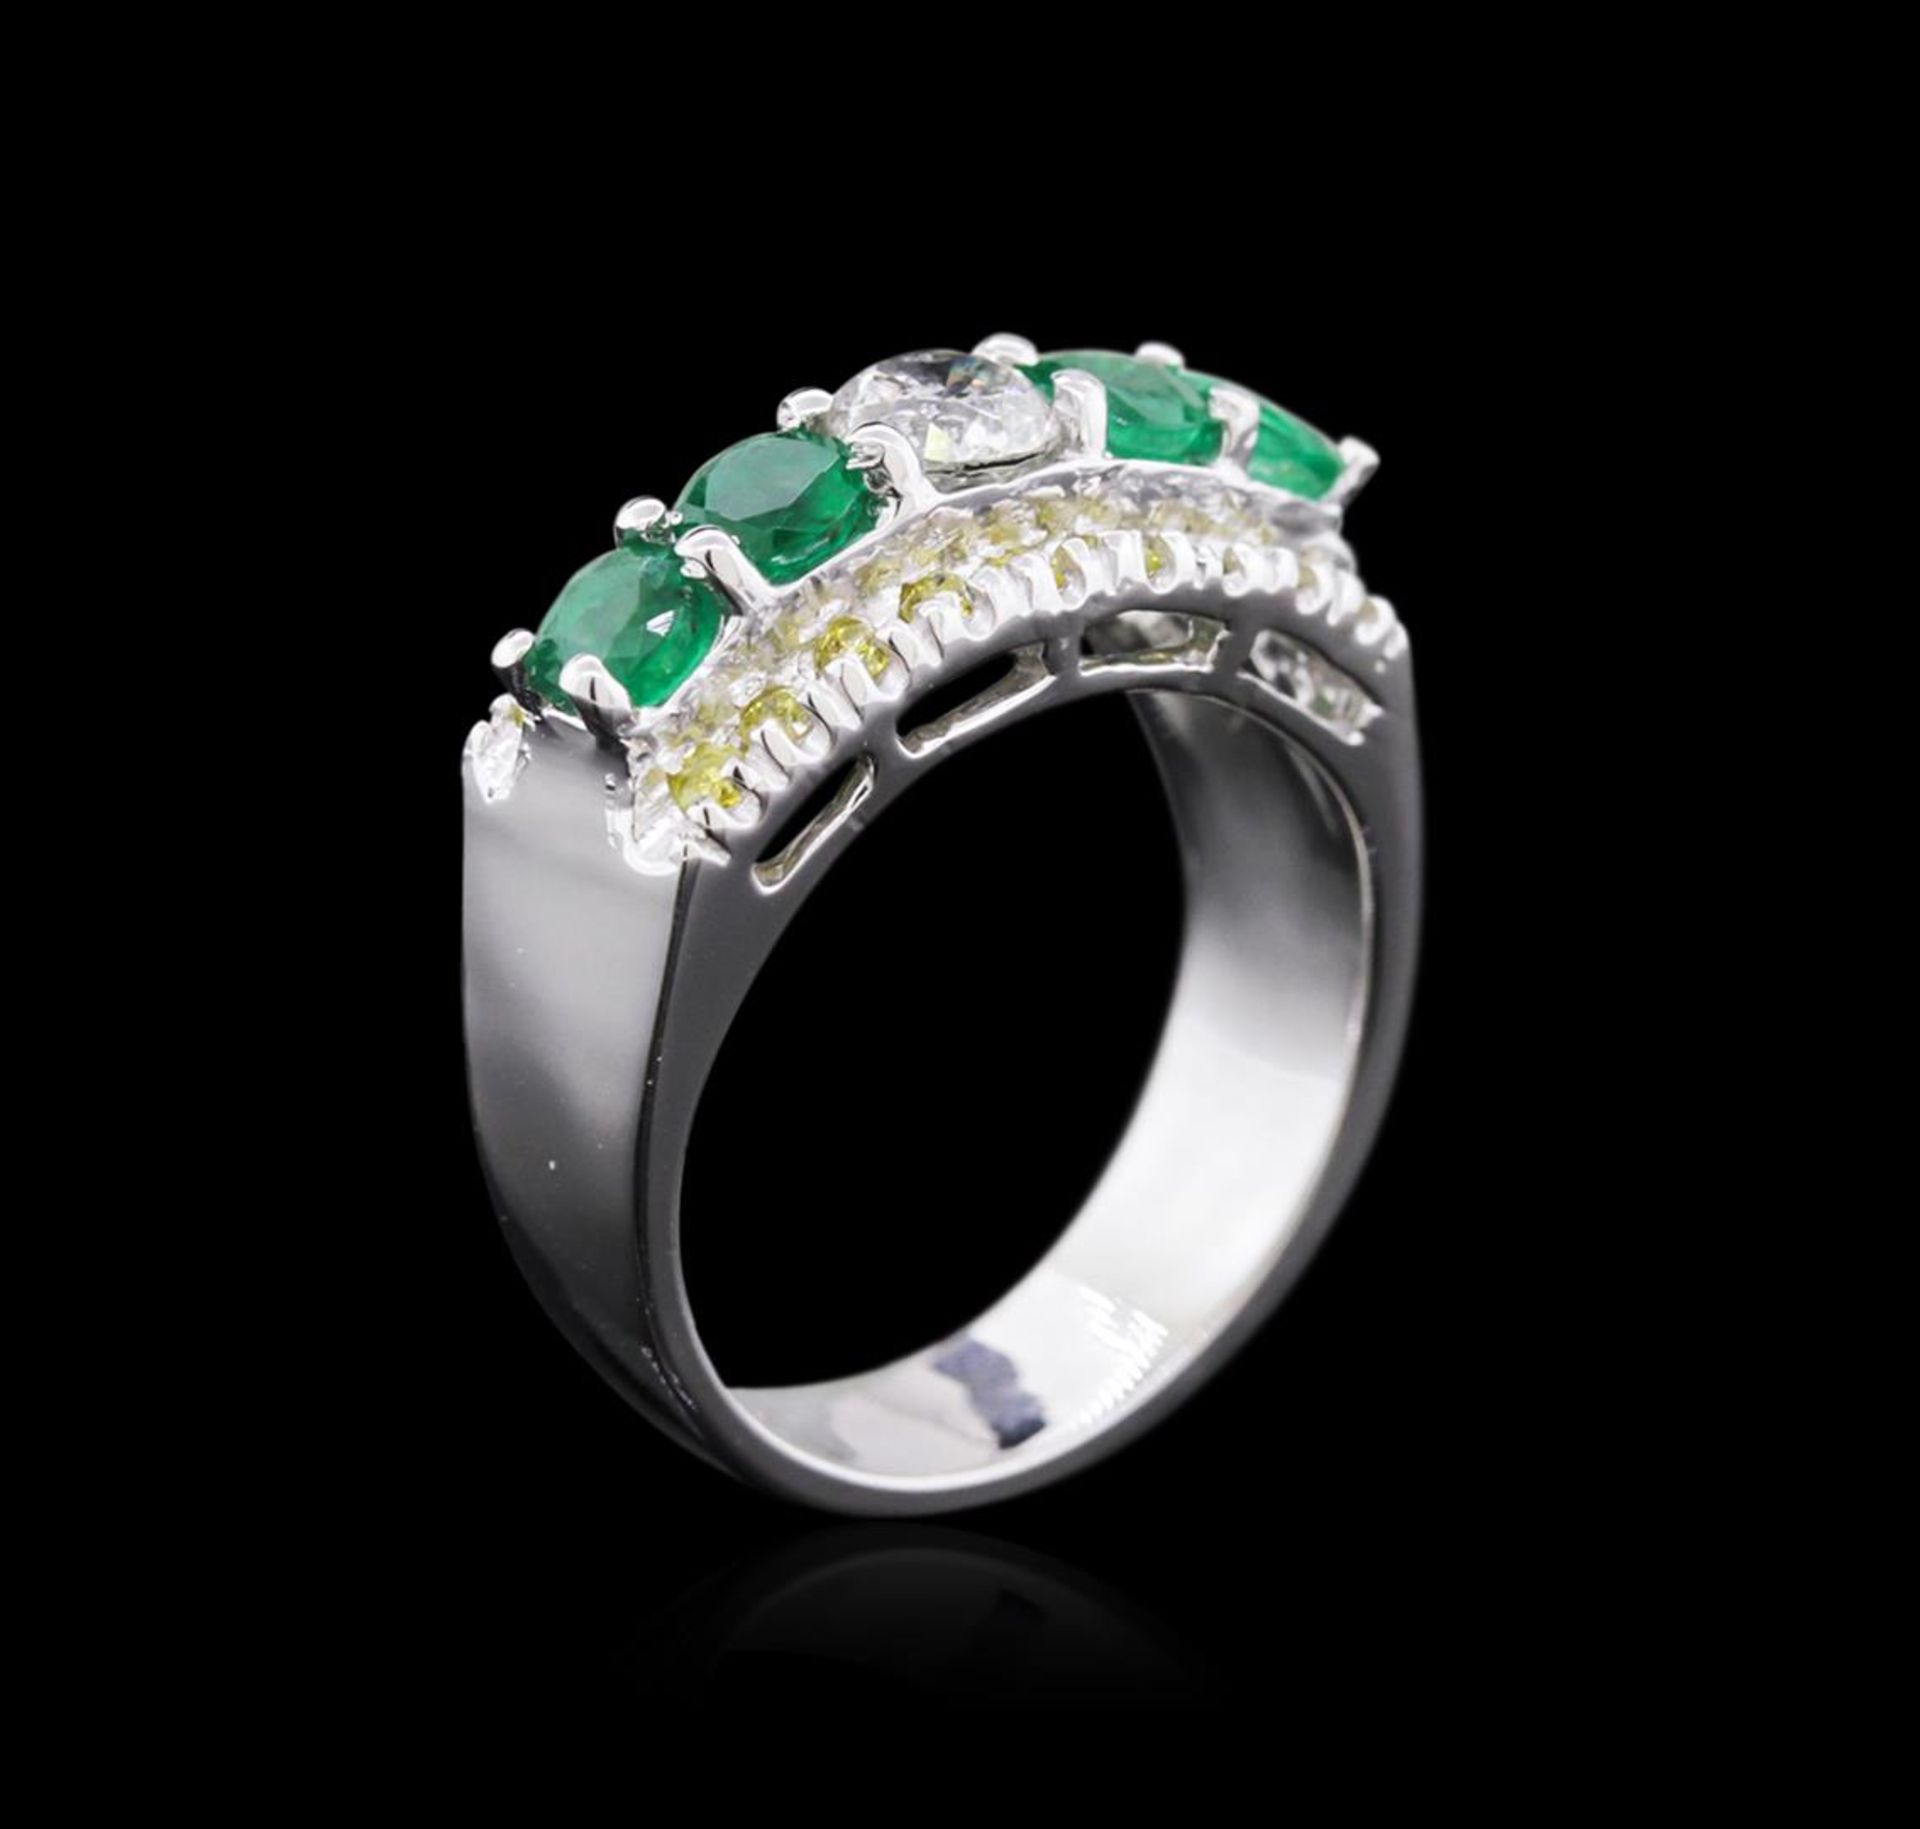 14KT White Gold 0.98 ctw Emerald and Diamond Ring - Image 3 of 4